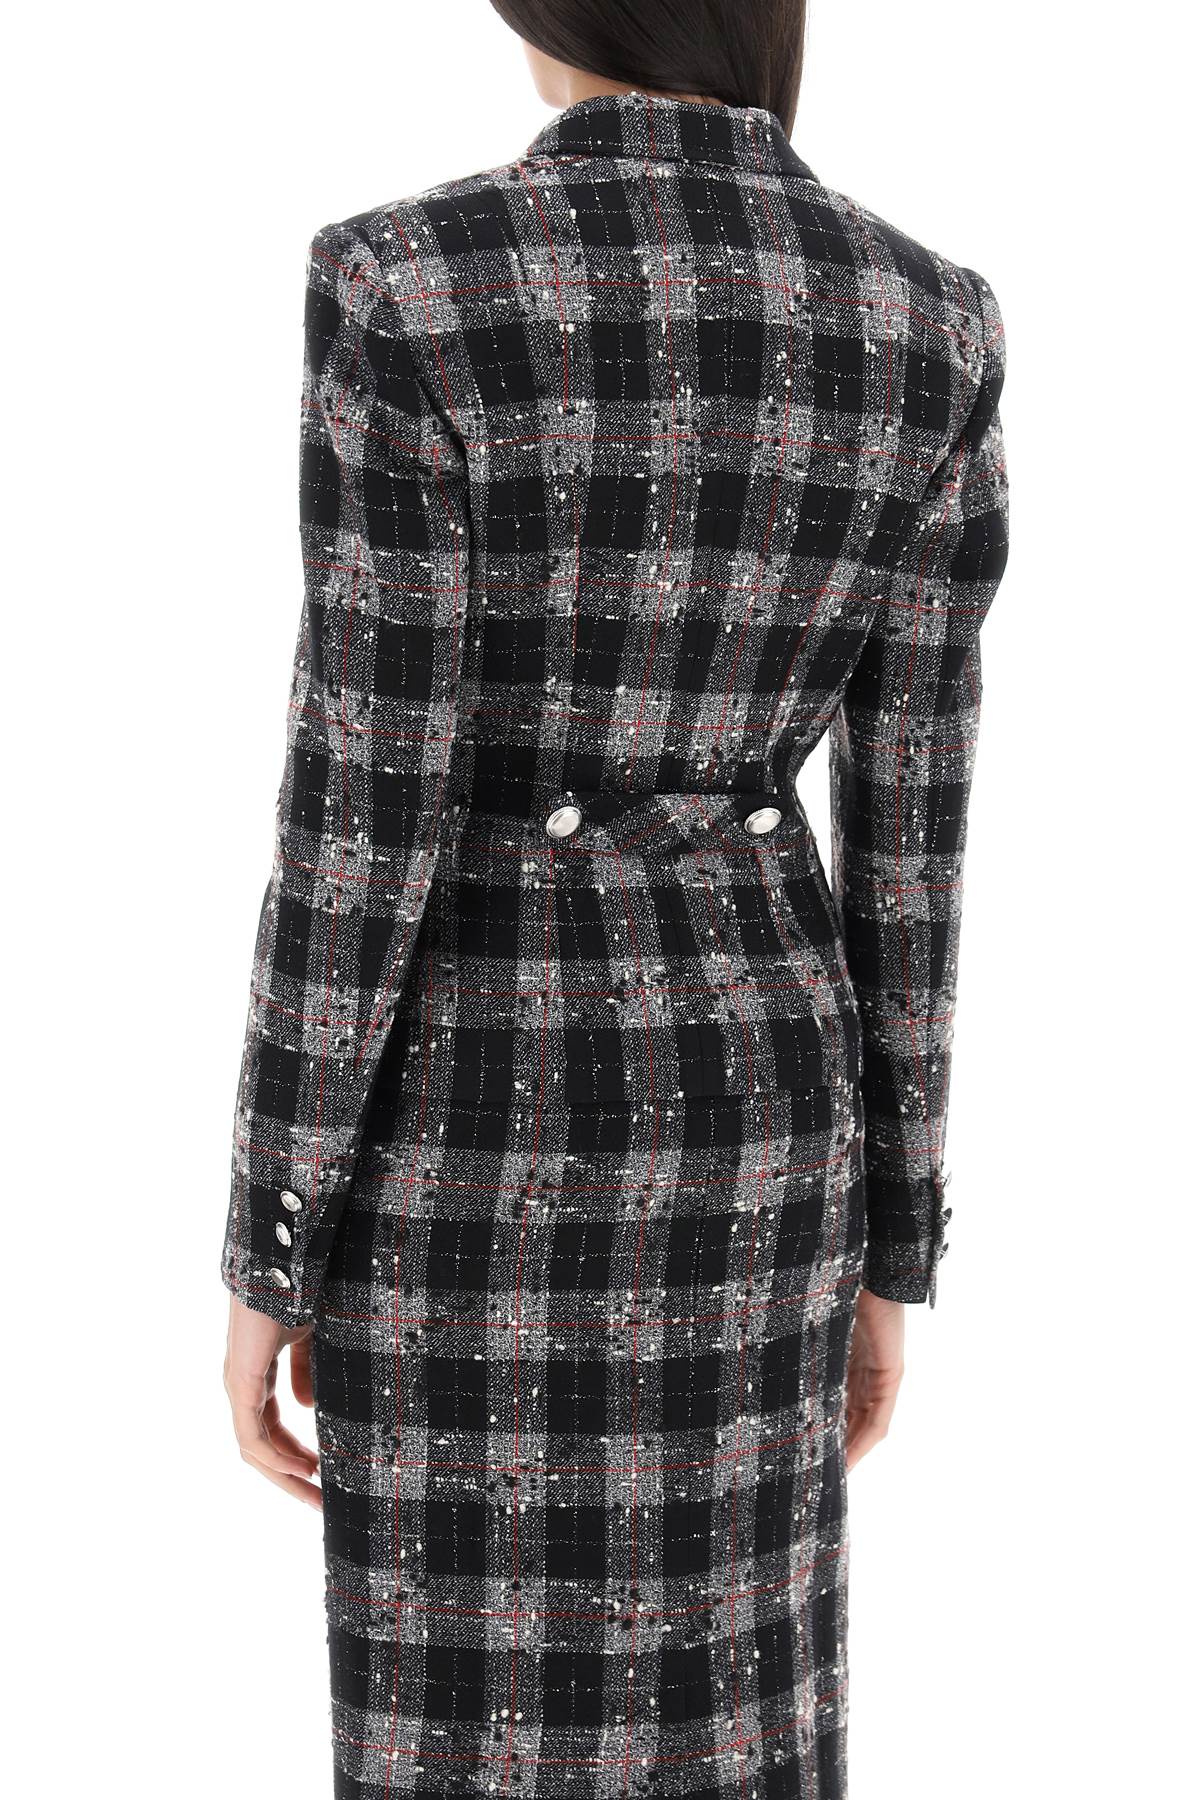 Alessandra rich single-breasted jacket in boucle' fabric with check motif-2